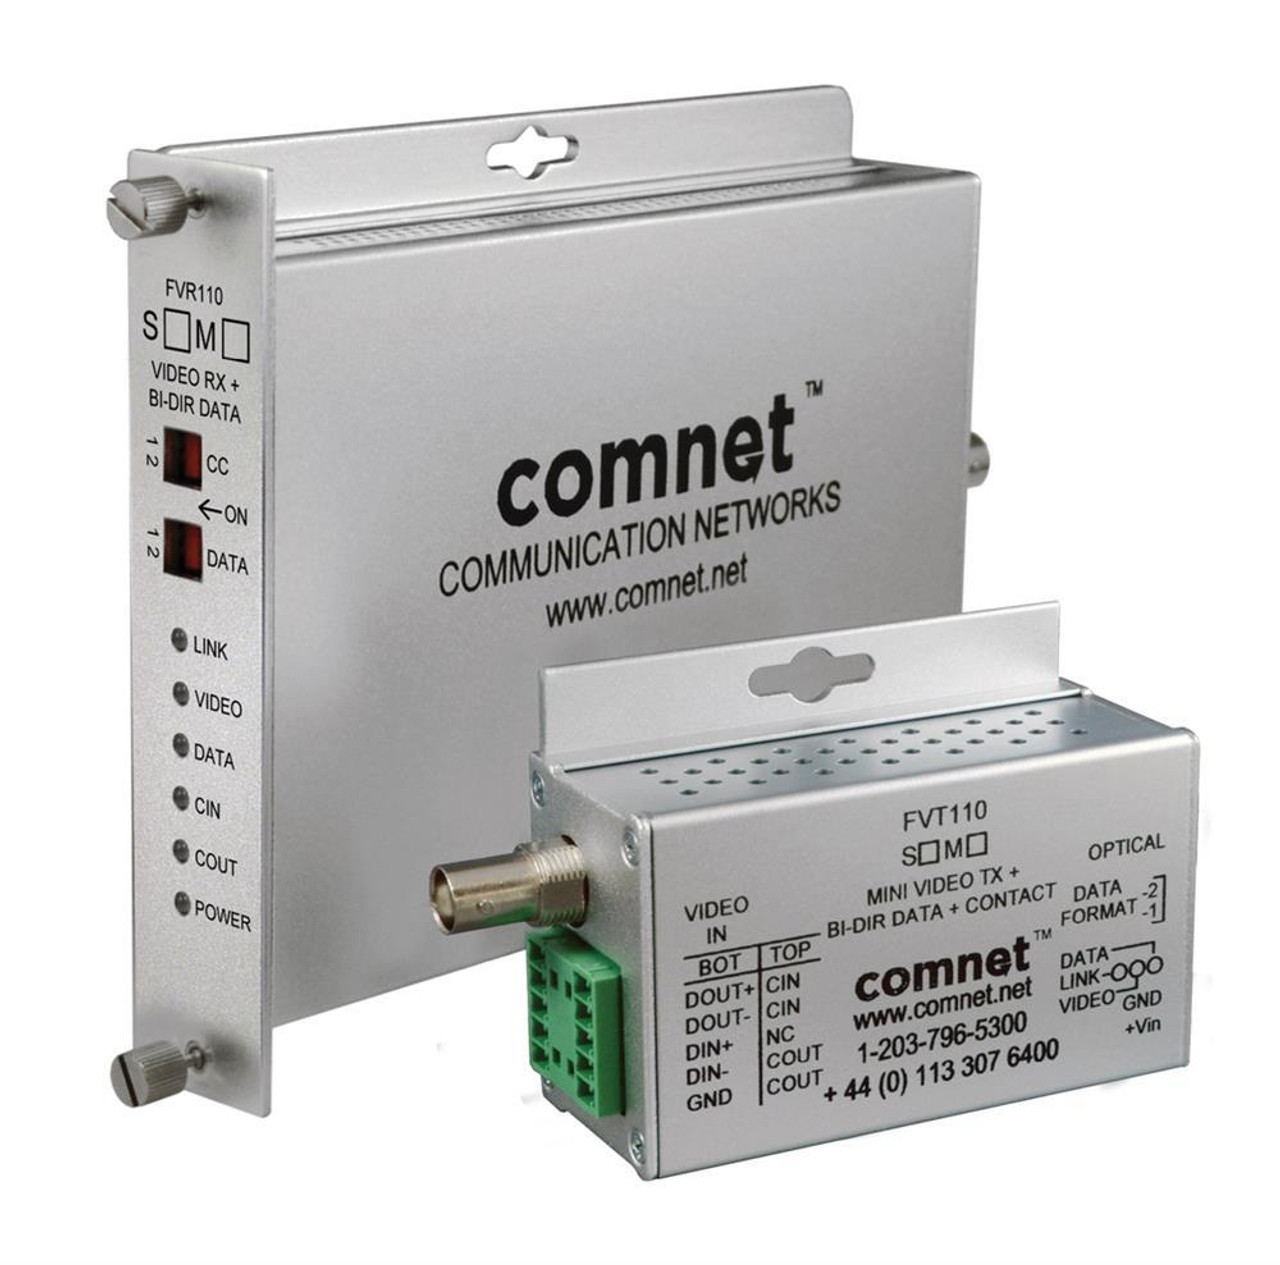 ComNet Video Receiver/Data Transreceiver Single Mode 10-Bit Digitally Encoded Video for Bilinx and Bi-Phase Control